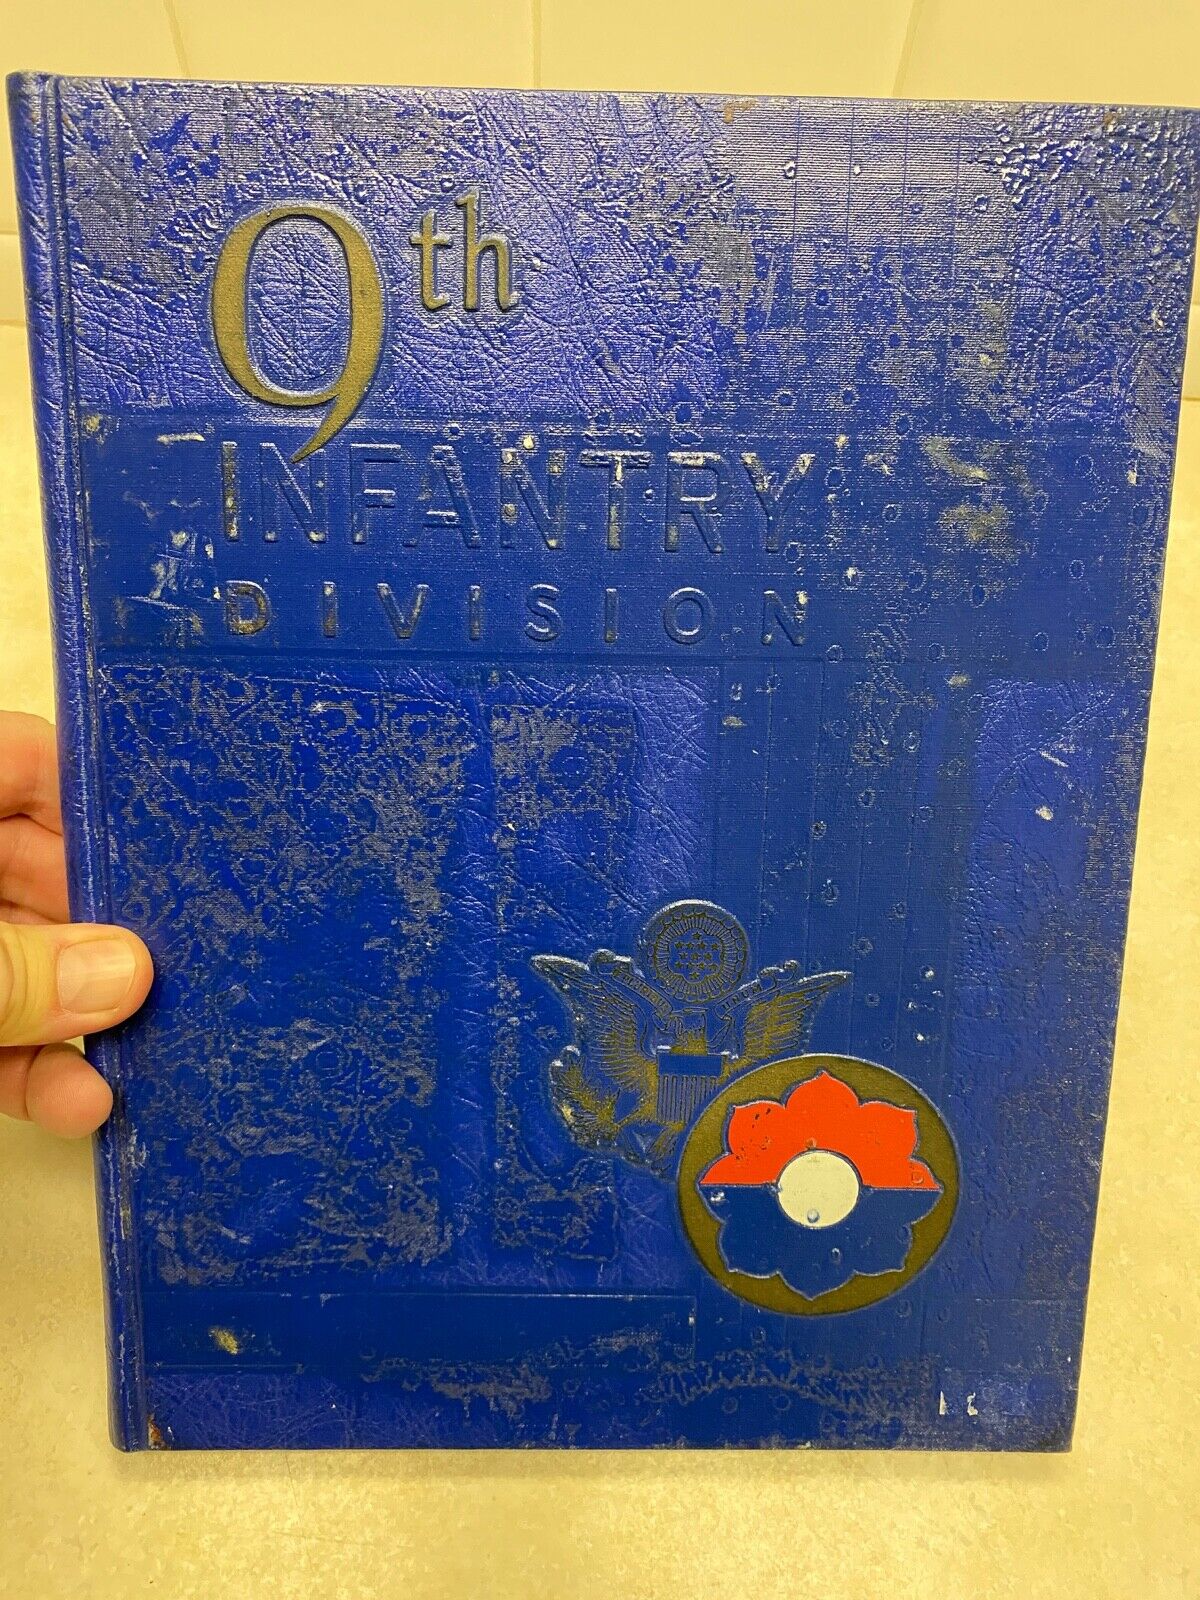 1950's US Army 9th Infantry Division Class Book - Fort Carson Colorado